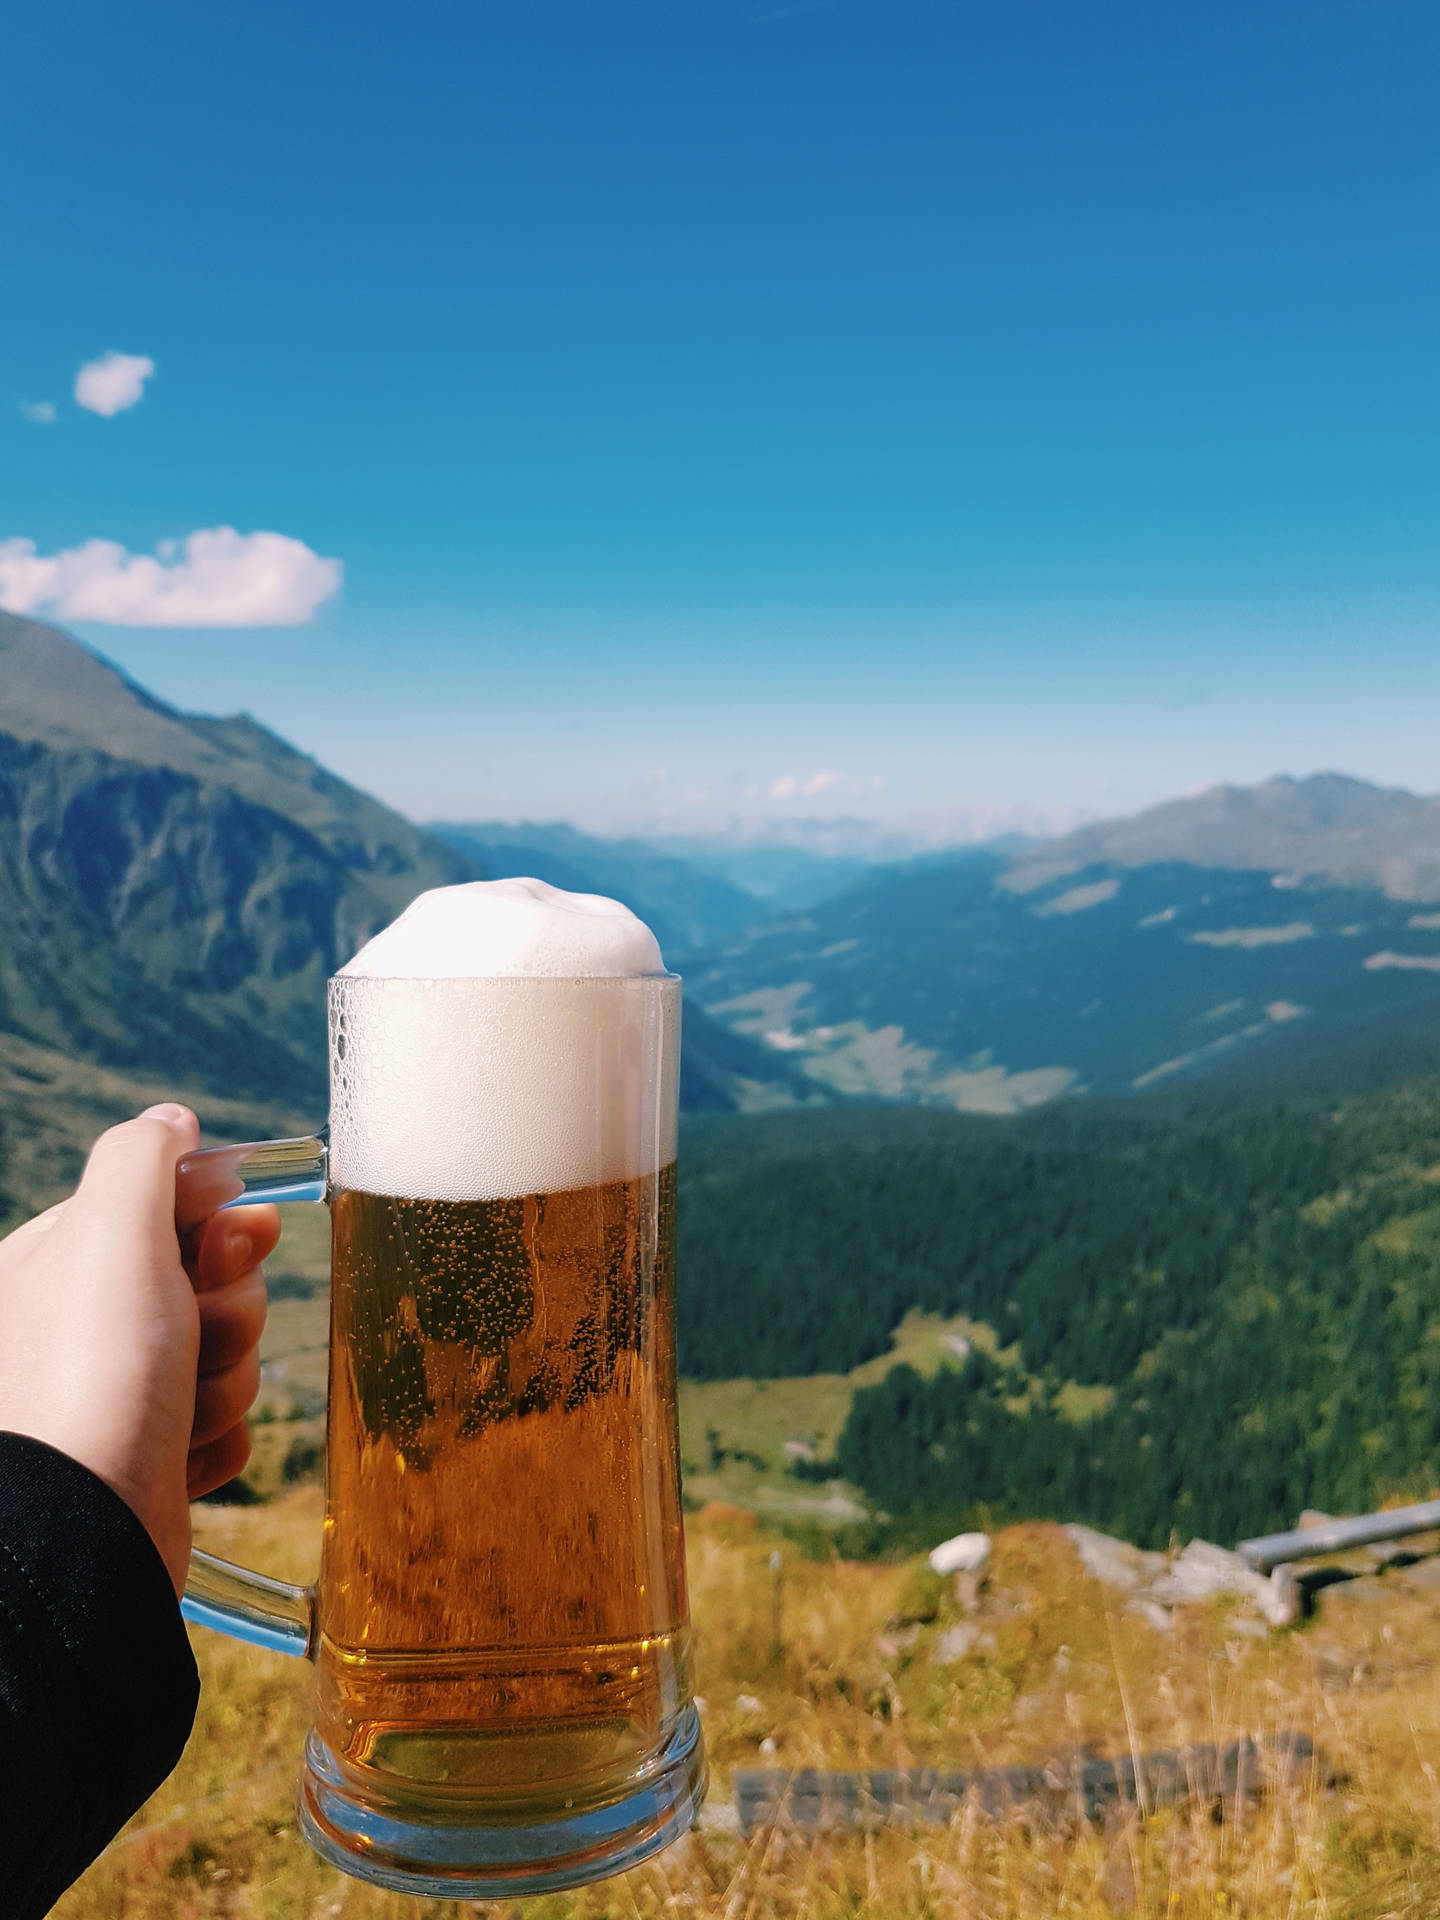 Enjoy A Beer In The Mountains